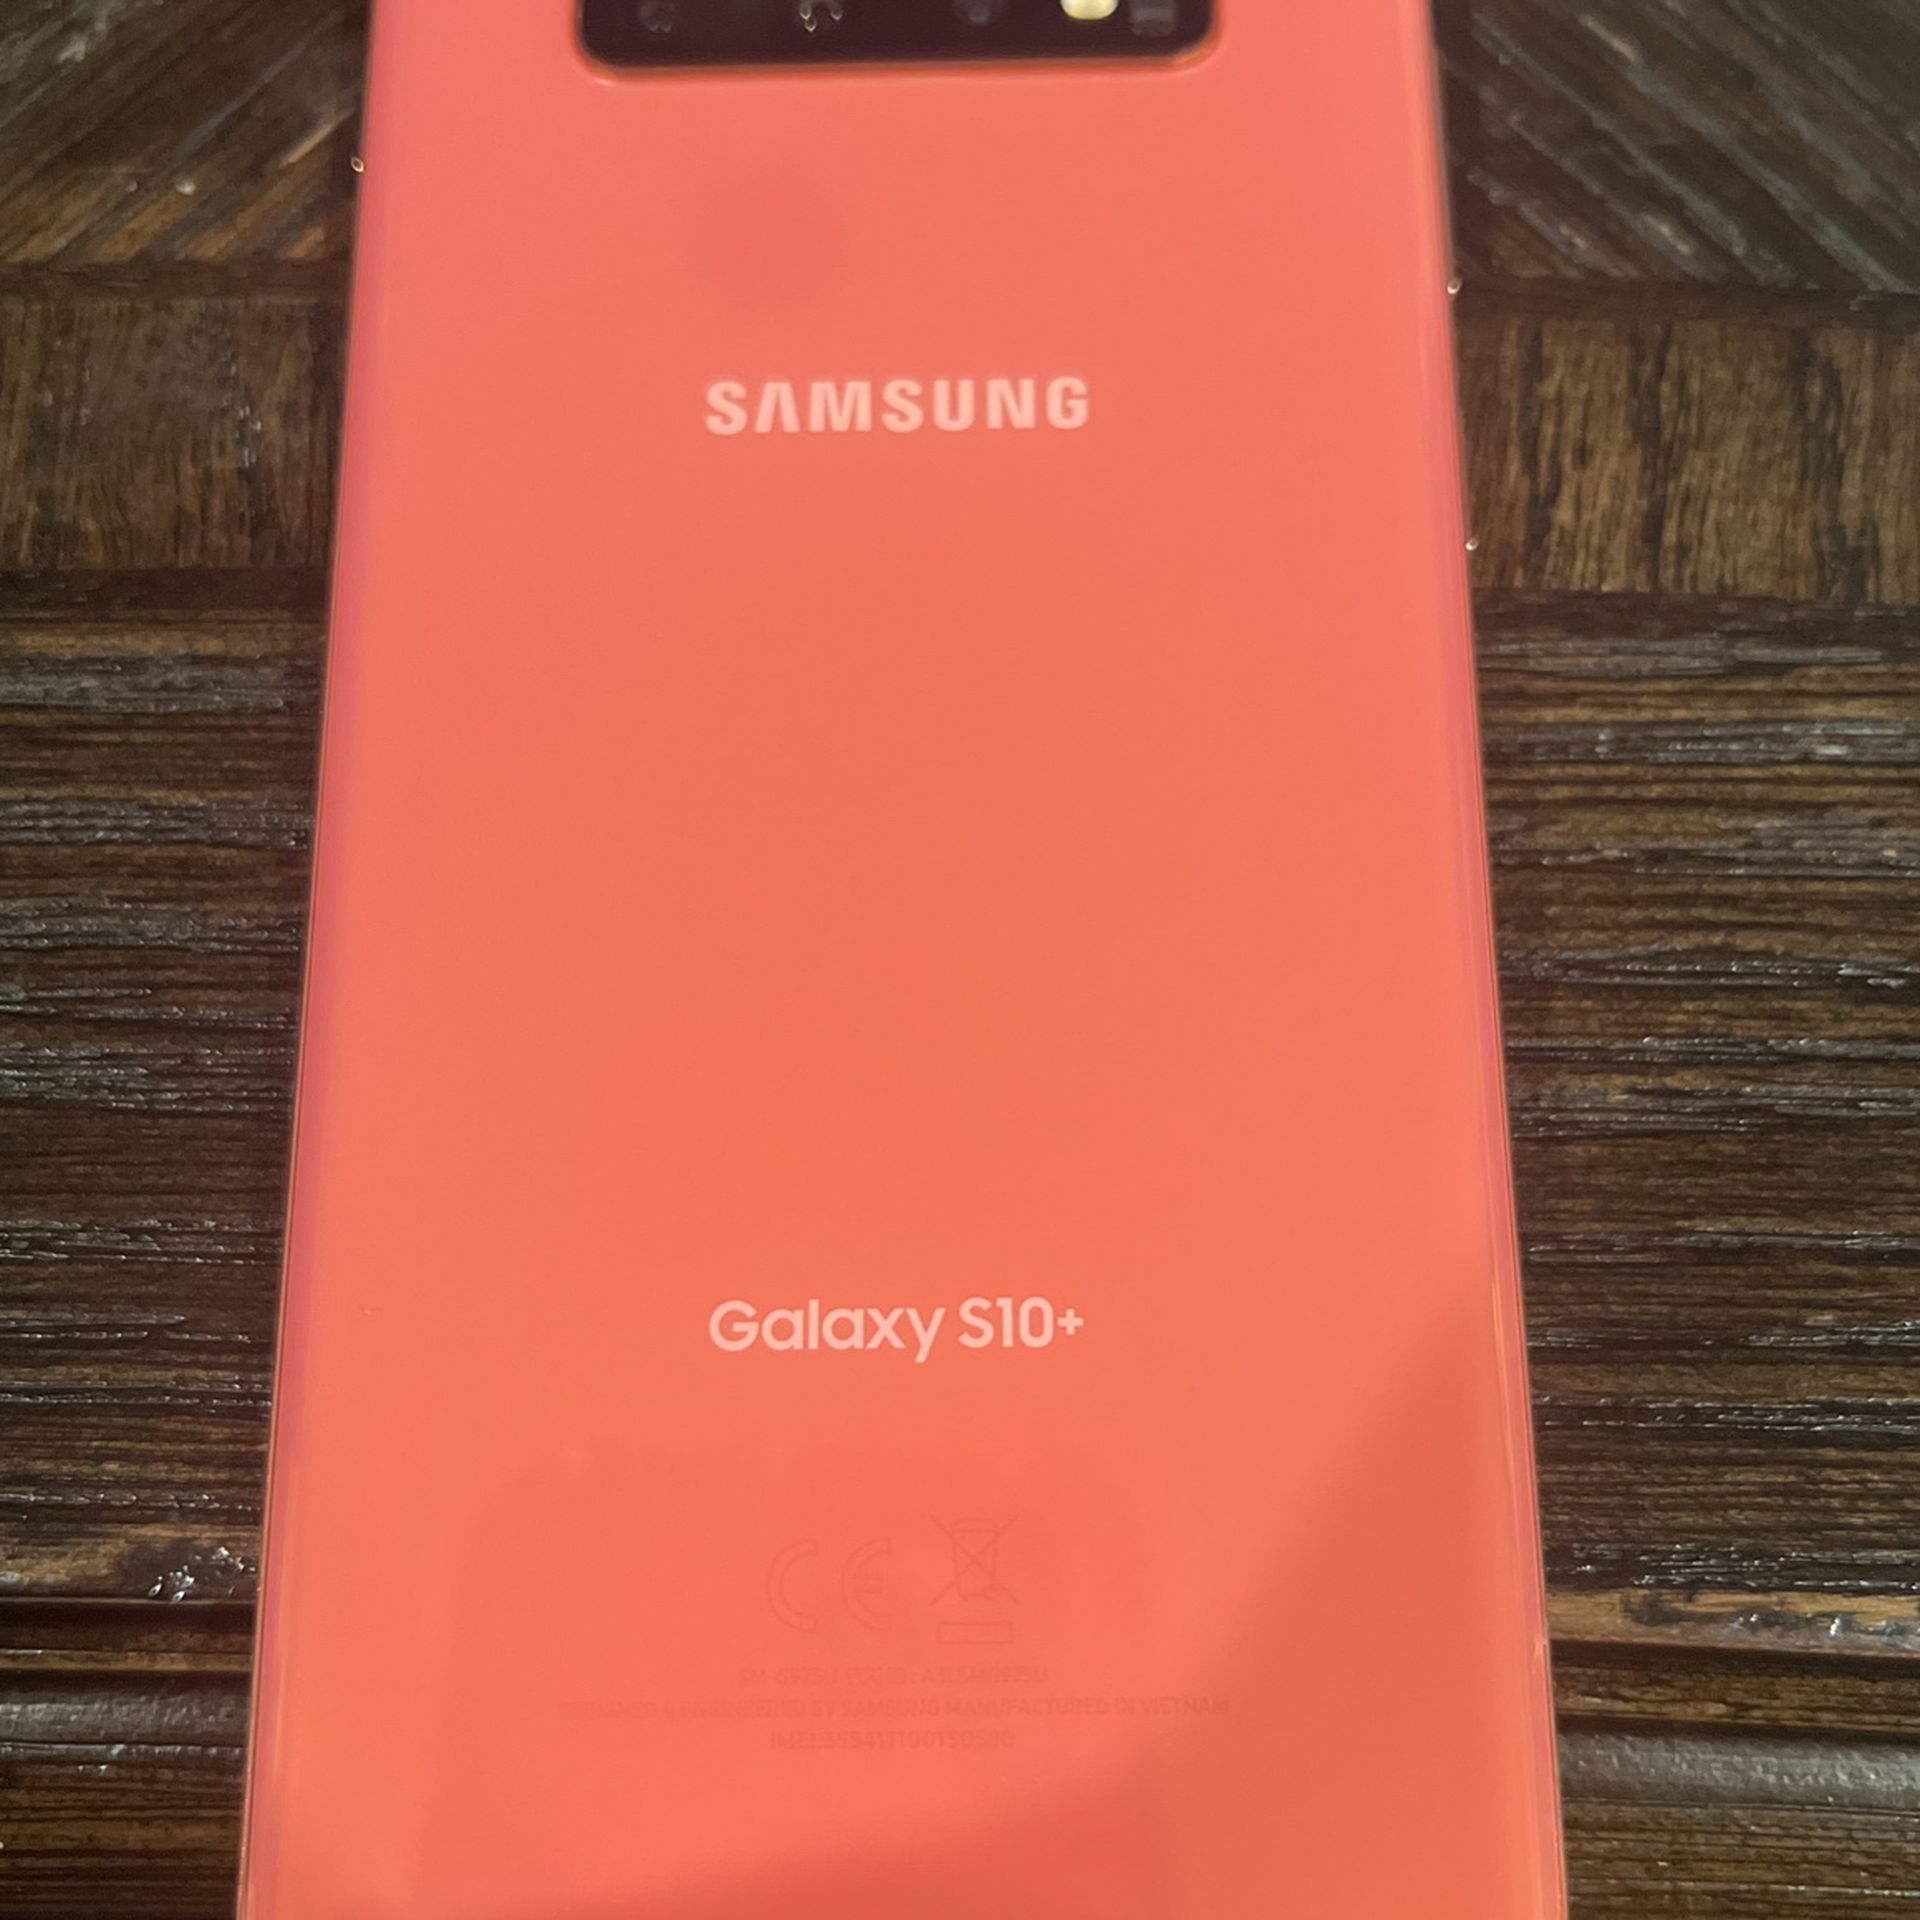 Samsung Galaxy S 10+ Plus For T-Mobile Or Metro PCS Cracked Screen